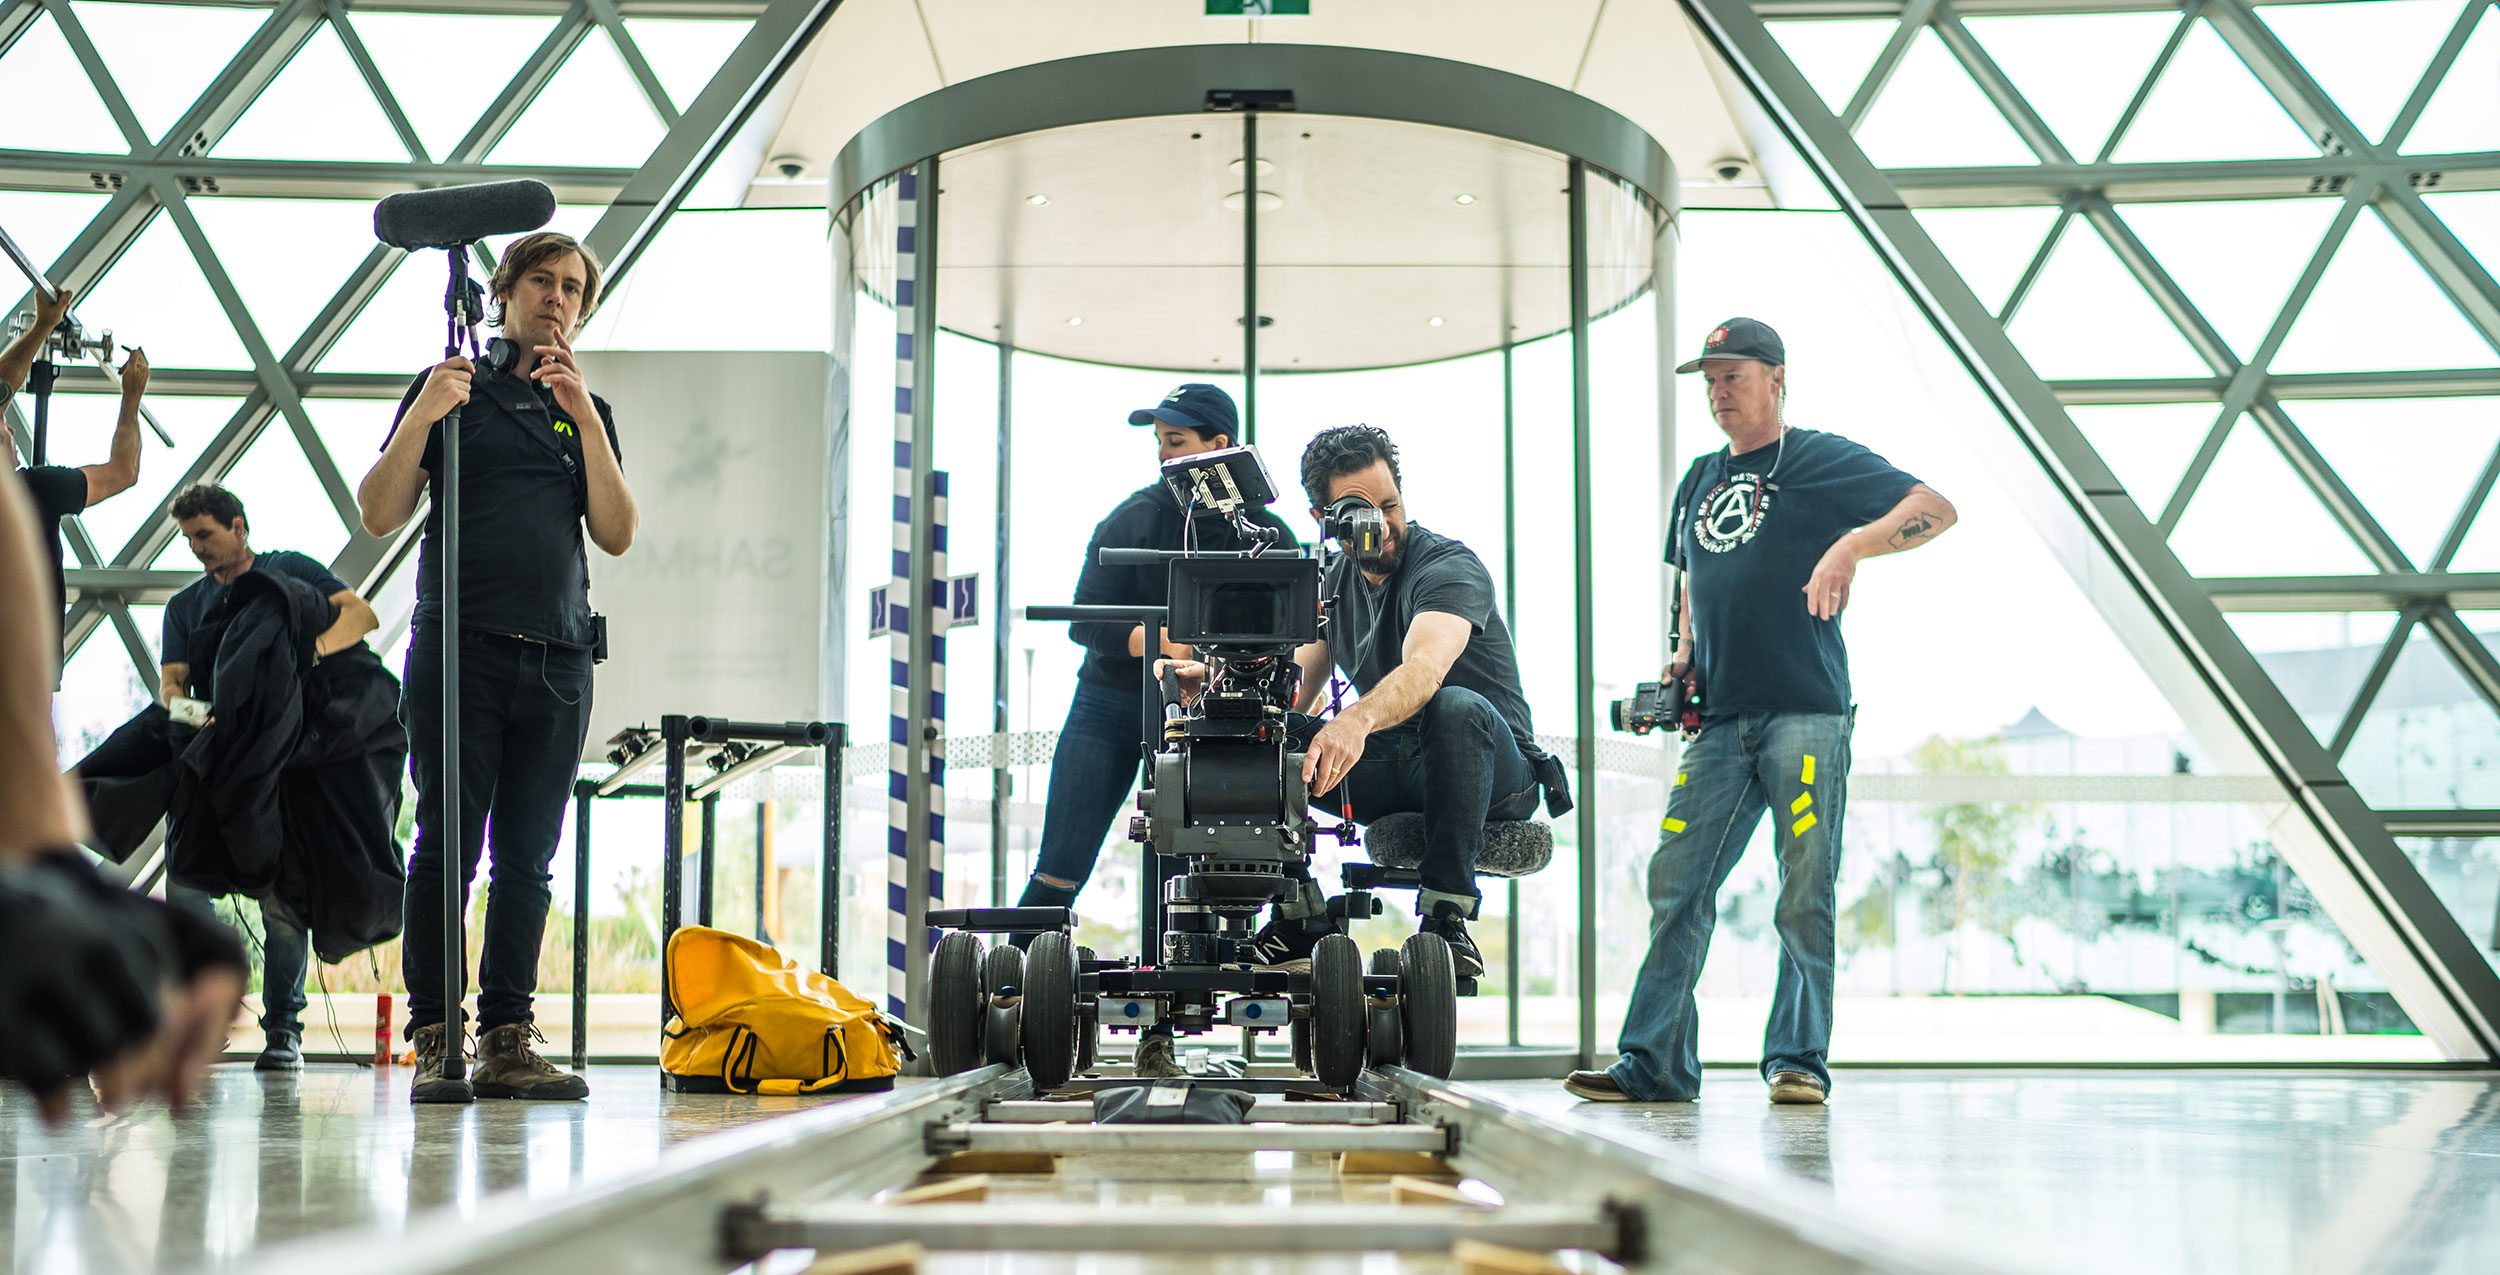 BTS of 2067 on location at the Sahmri building - photo by Matt Byrne